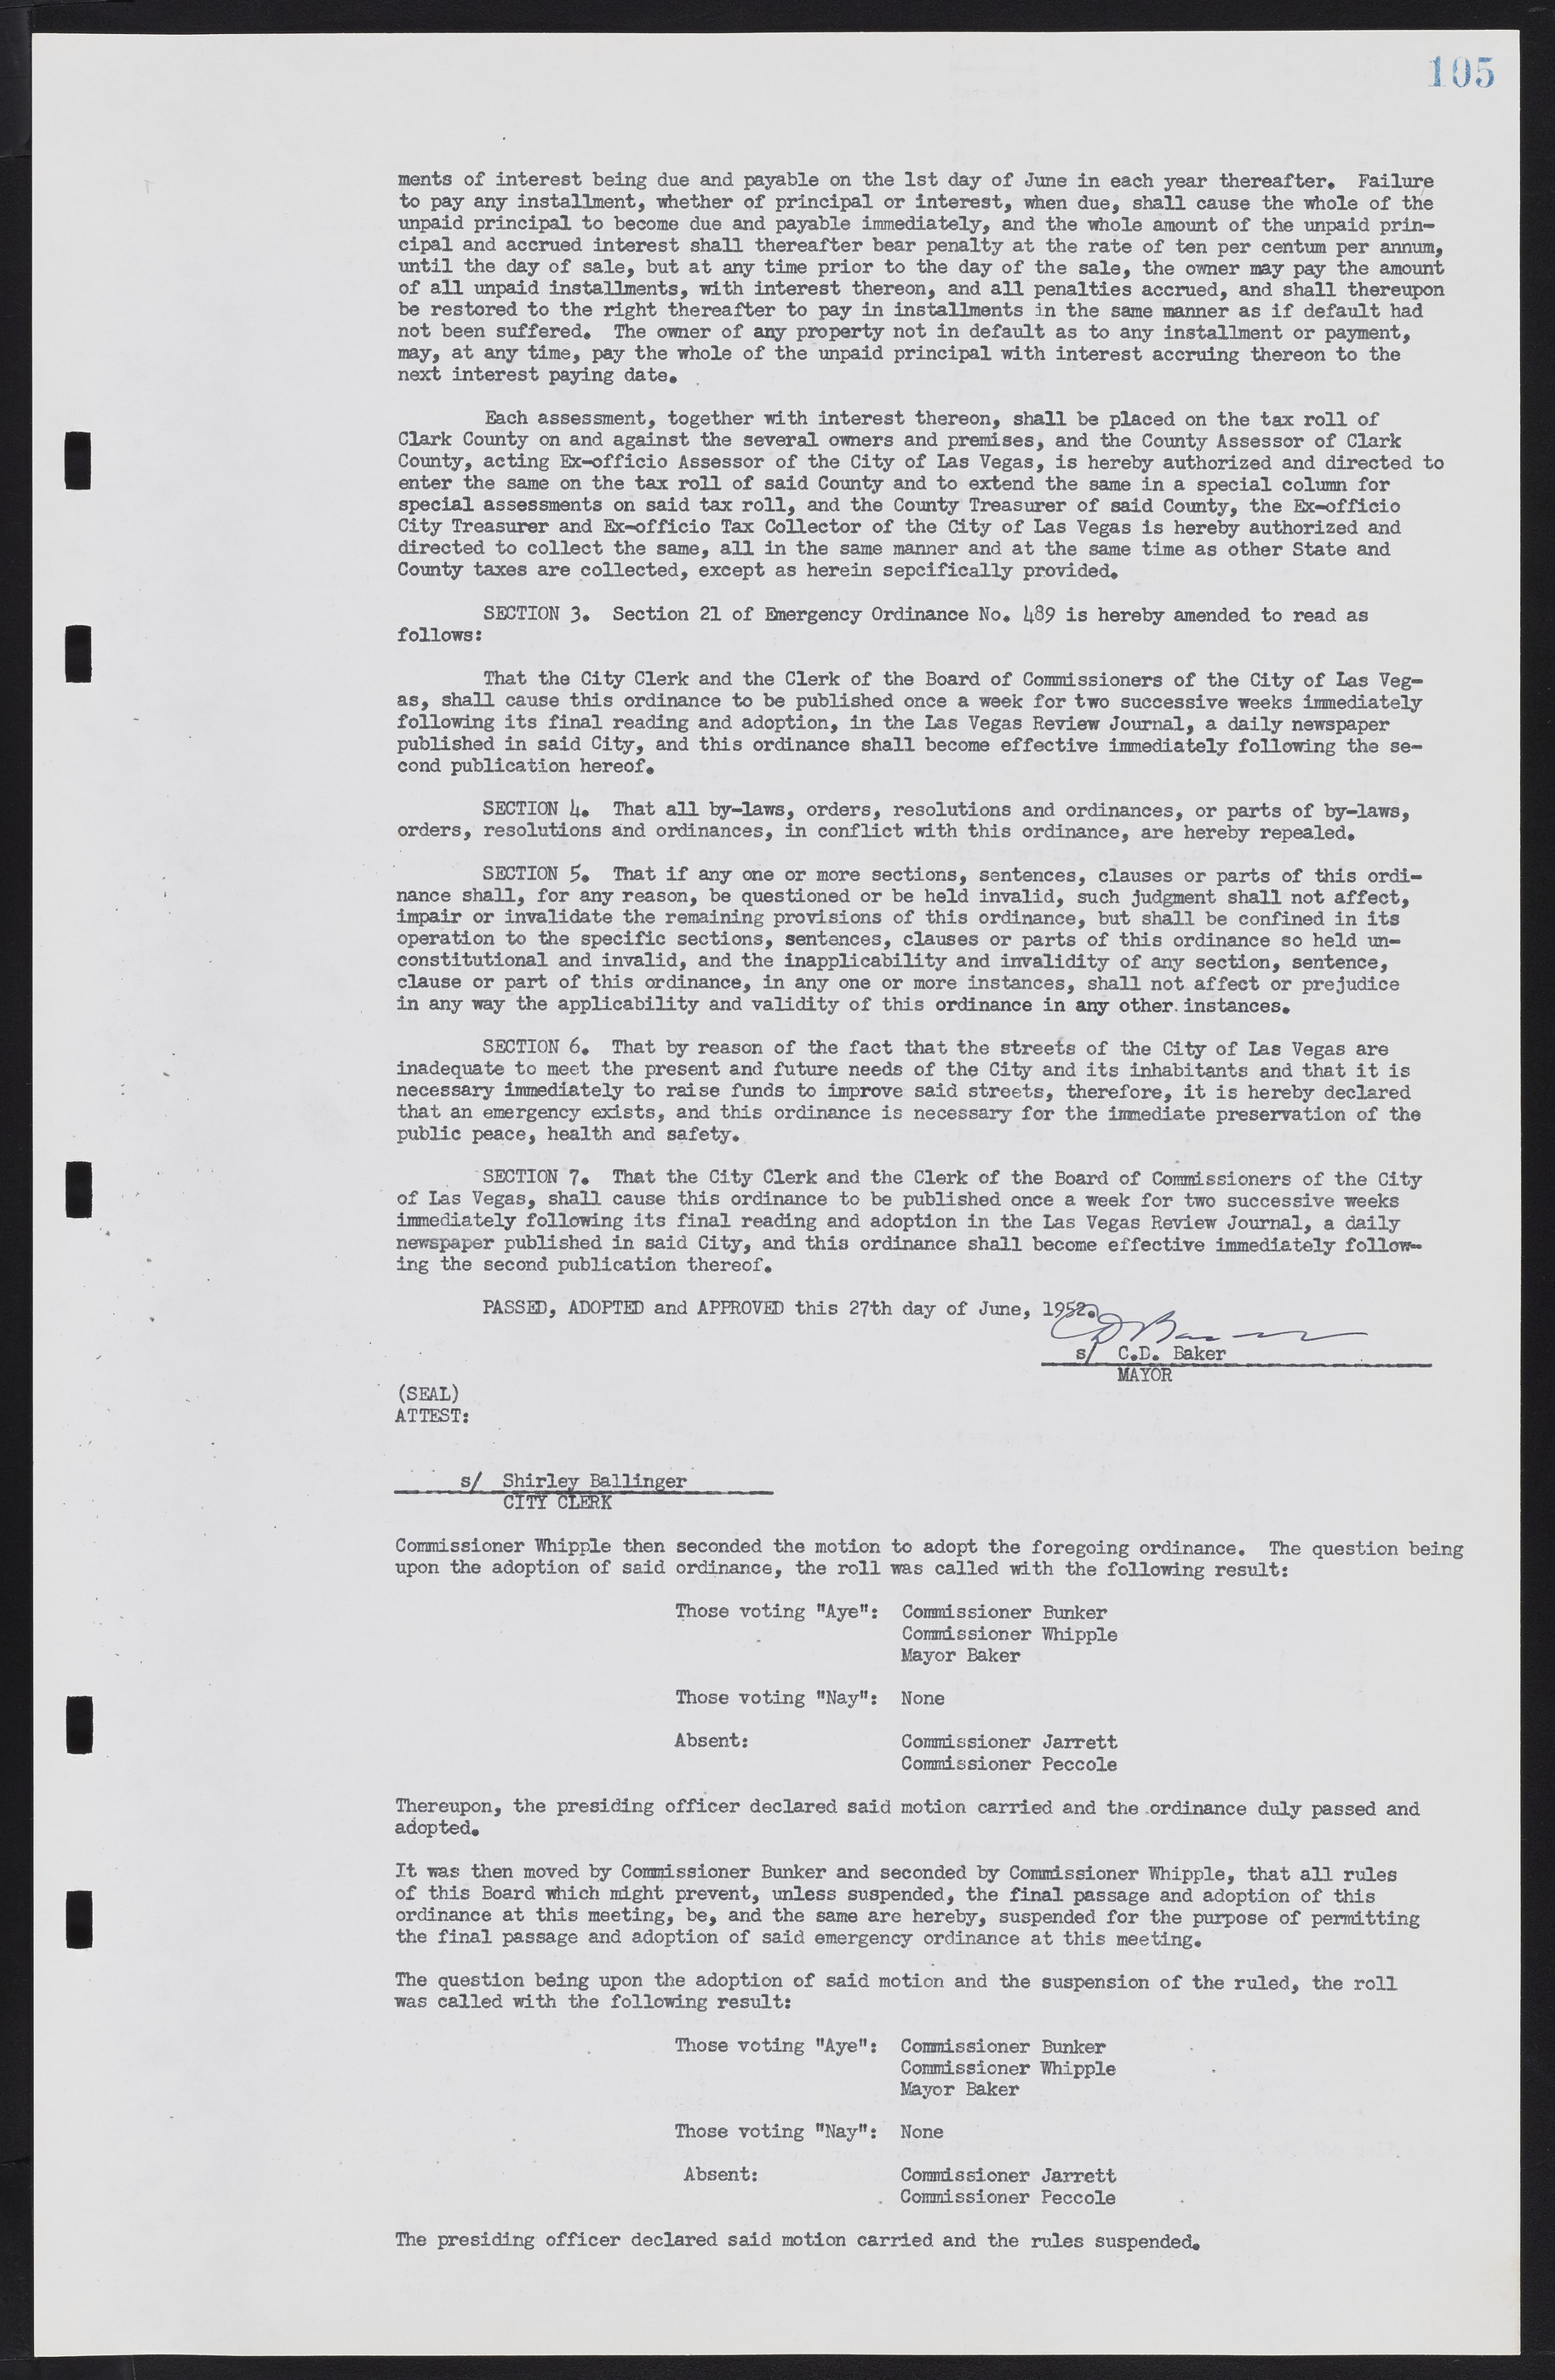 Las Vegas City Commission Minutes, May 26, 1952 to February 17, 1954, lvc000008-109